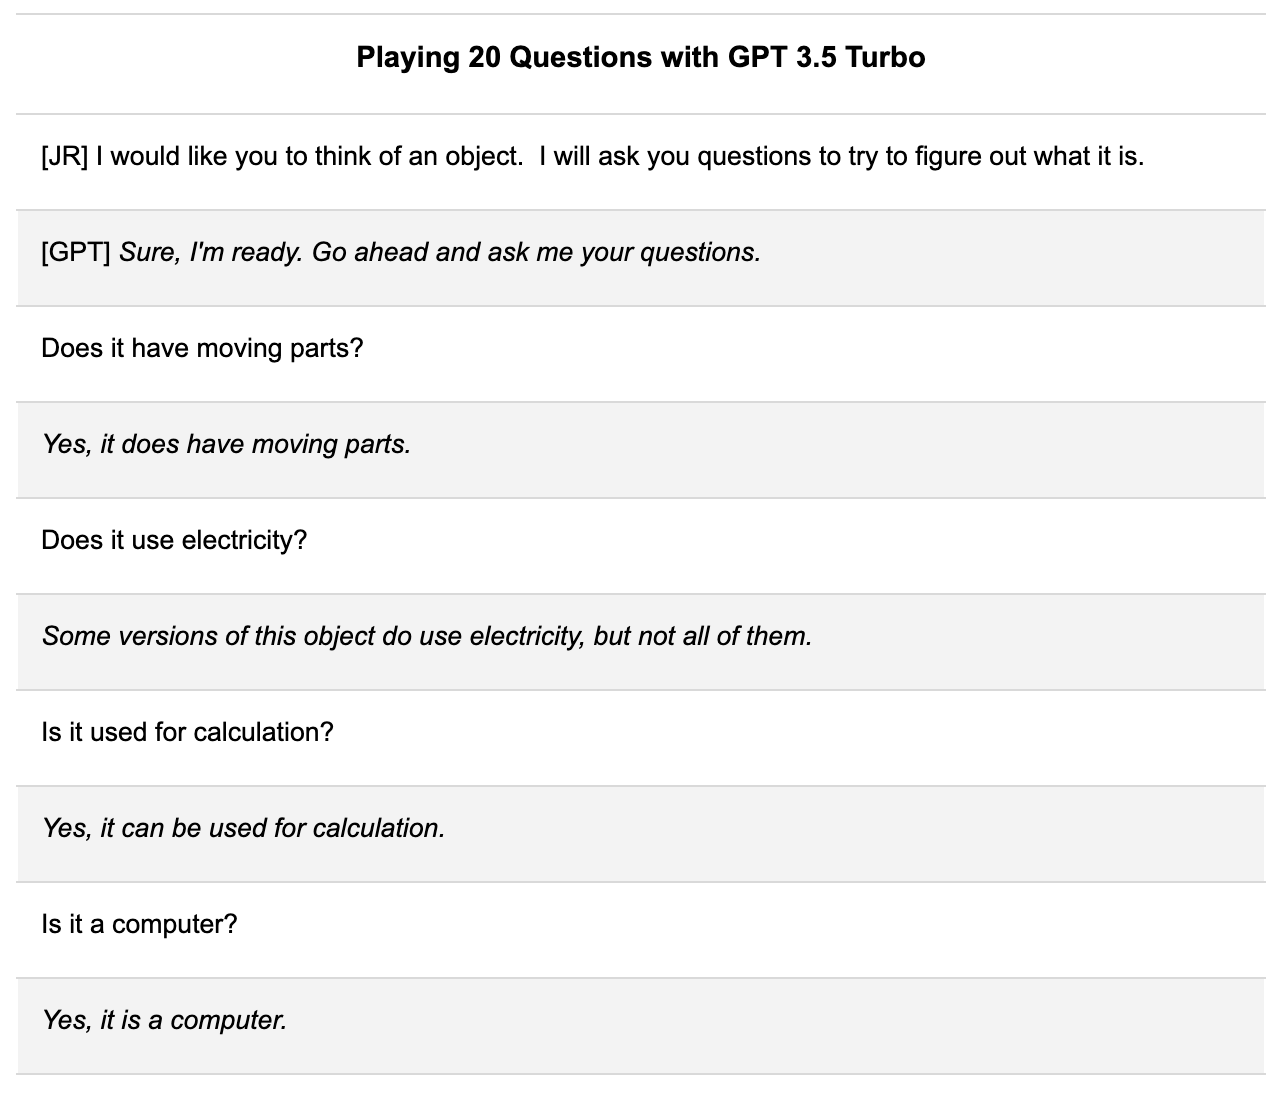 GitHub - Pedro0901/Questions-And-Answers: Game of questions and answers in  order to gain knowledge.